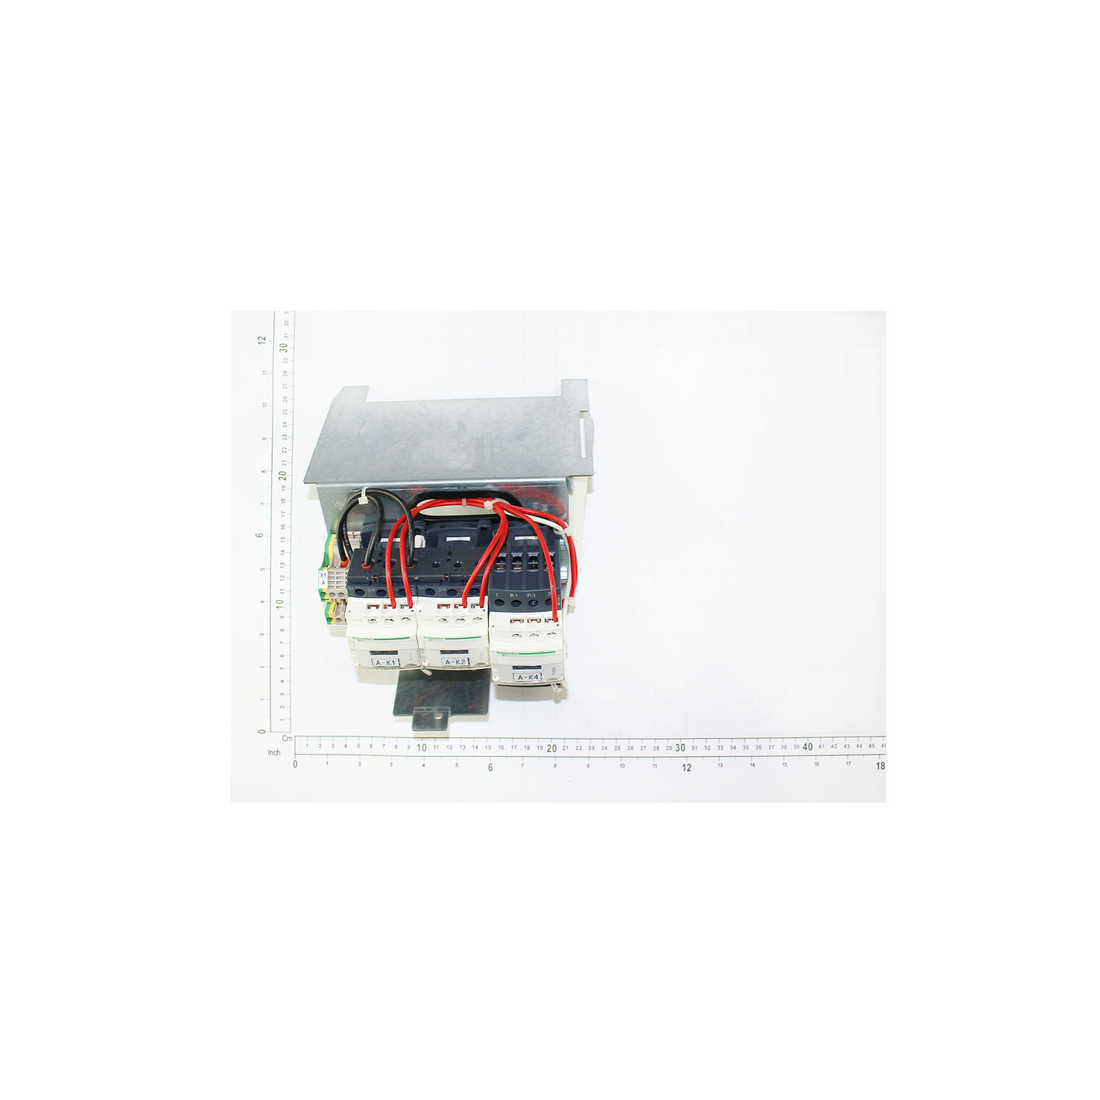 R&M Parts - Motor Control Board, Part Number: 3000007553